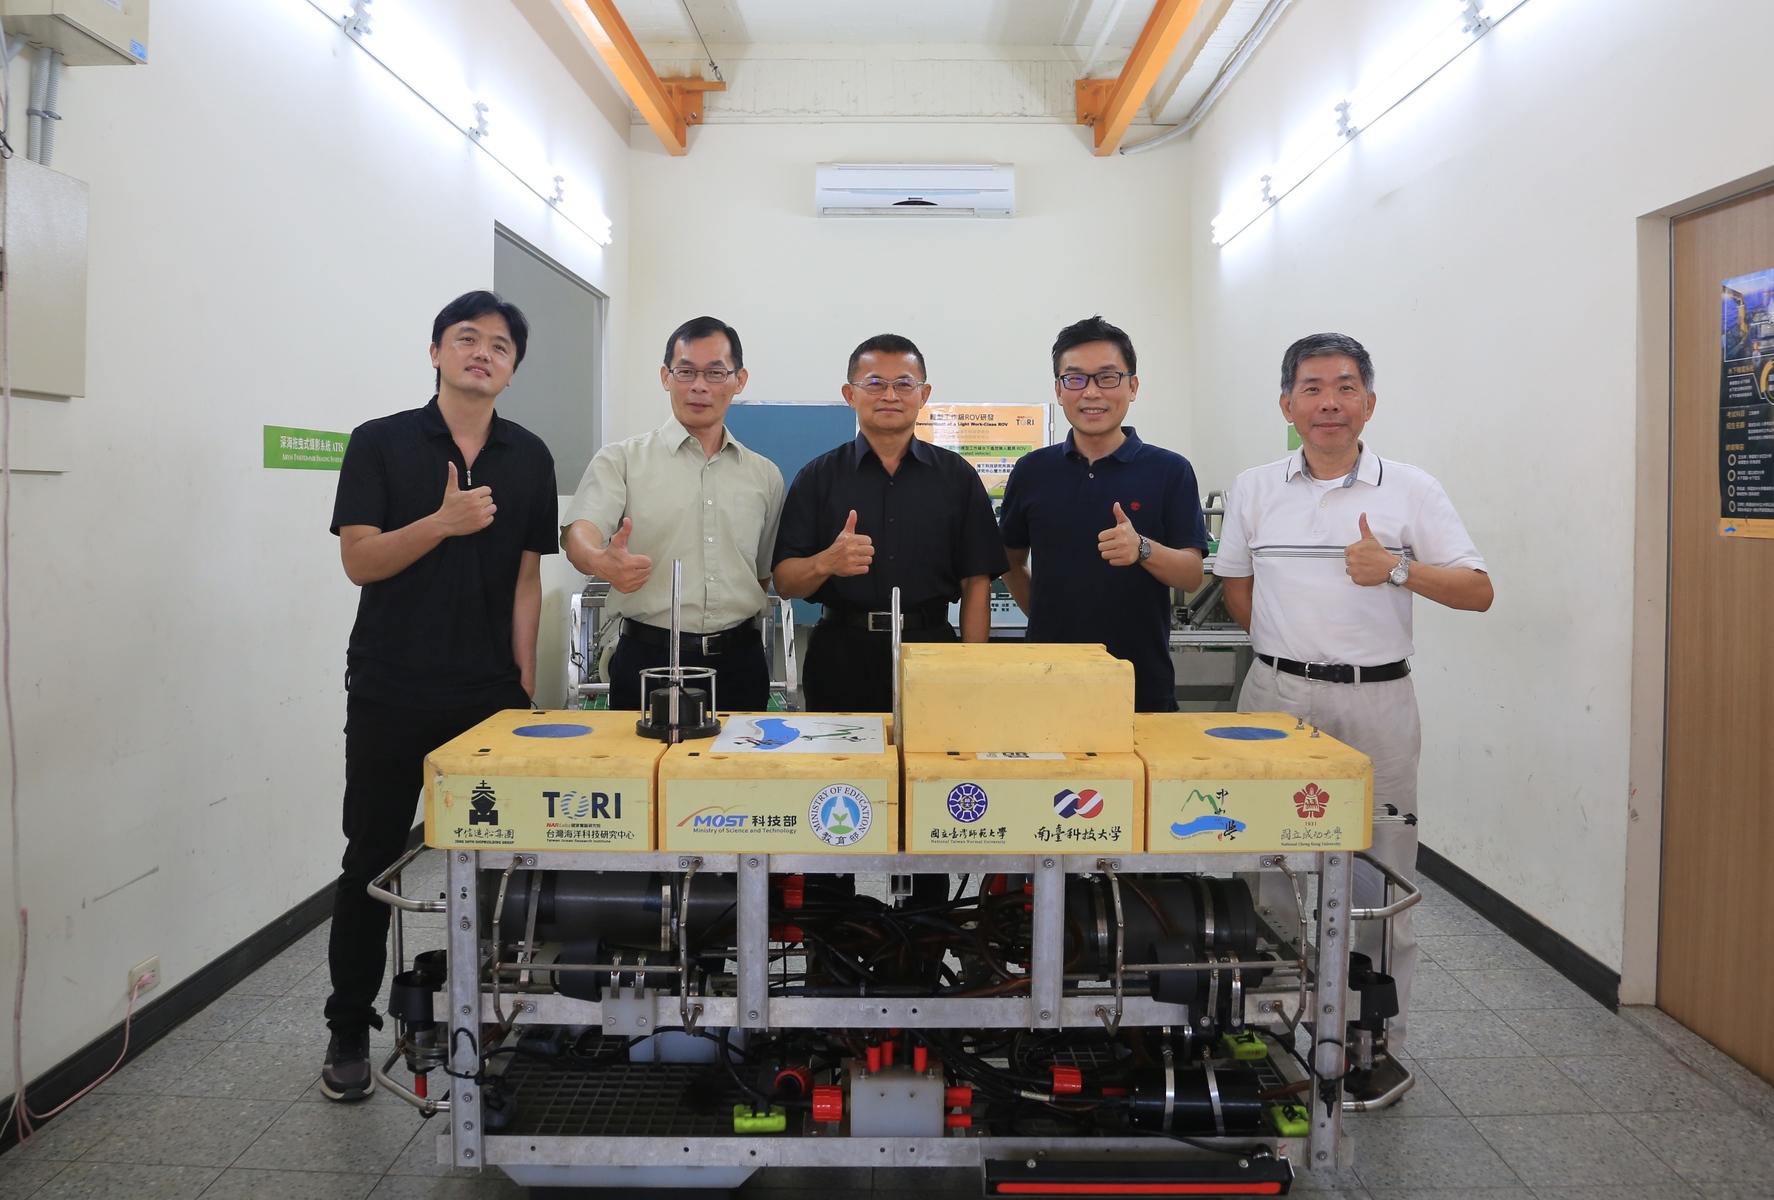 NSYSU team implemented the Key Technology Development for Autonomous Underwater Vehicle with Artificial Intelligence project, which is a key project of the National Science and Technology Council’s Semiconductor Moonshot Project. The AUV applied AI and Deep Learning technology along with information and communications techniques, semiconductors, and embedded systems, launching the first made-in-Taiwan marine-specific AUV. (From the left of the photo) Linus Yung-Sheng Chiu, the Associate Professor of the Institute of Undersea Technology (IUT) at NSYSU, Hsin-Hung Chen, Director and Professor of IUT, Chua-Chin Wang, Professor of the Department of Electrical Engineering and Vice President for Research and Development at NSYSU, Yu-Cheng Chou, the Associate Professor of IUT, and Chau-Chang Wang, the Professor of IUT.